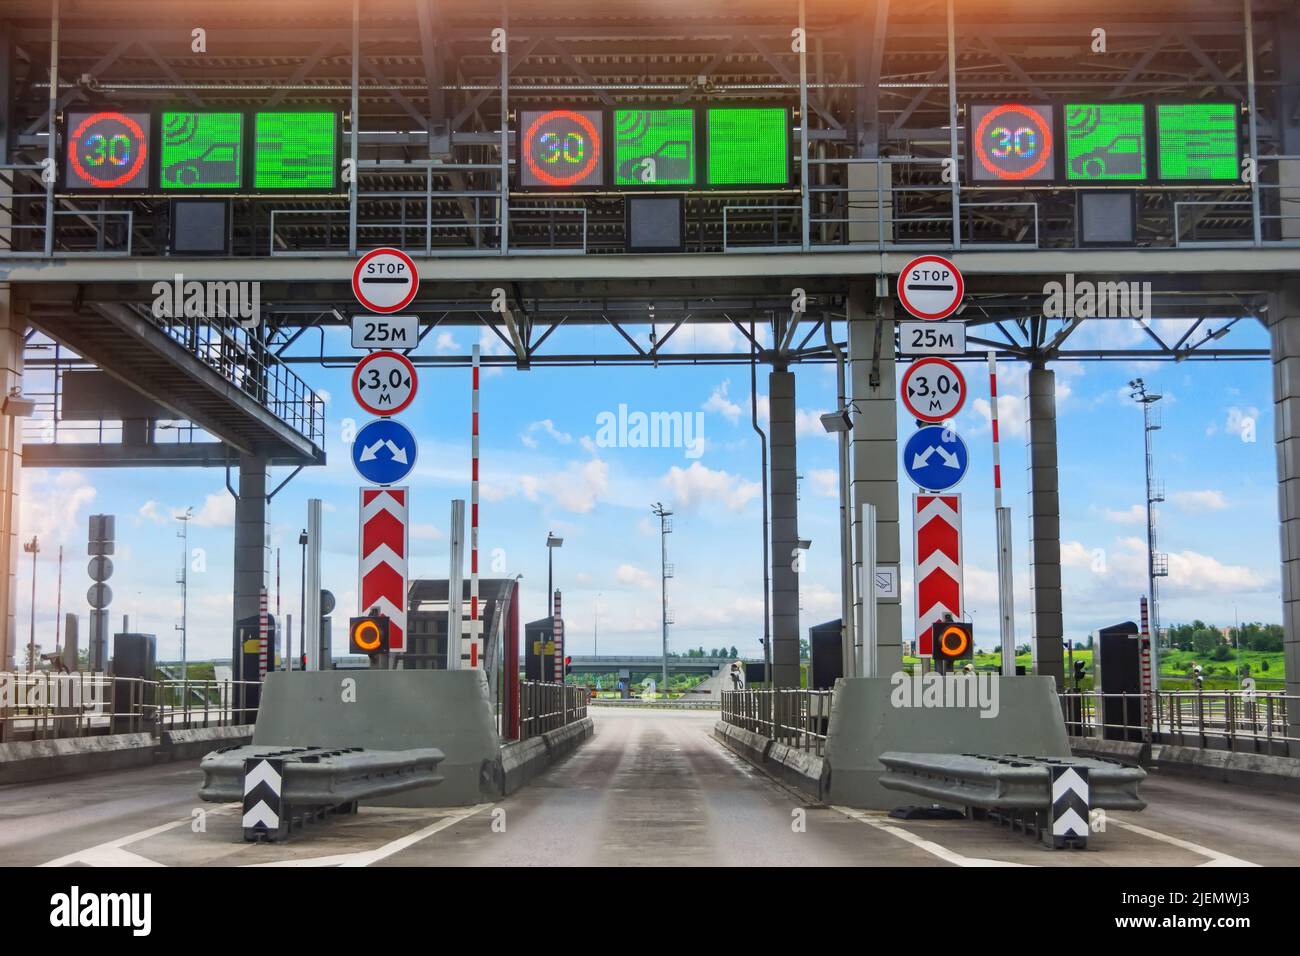 View without cars at the entrance to the toll road, limited by the barrier. Cashless payment transponder, speed limit signs Stock Photo